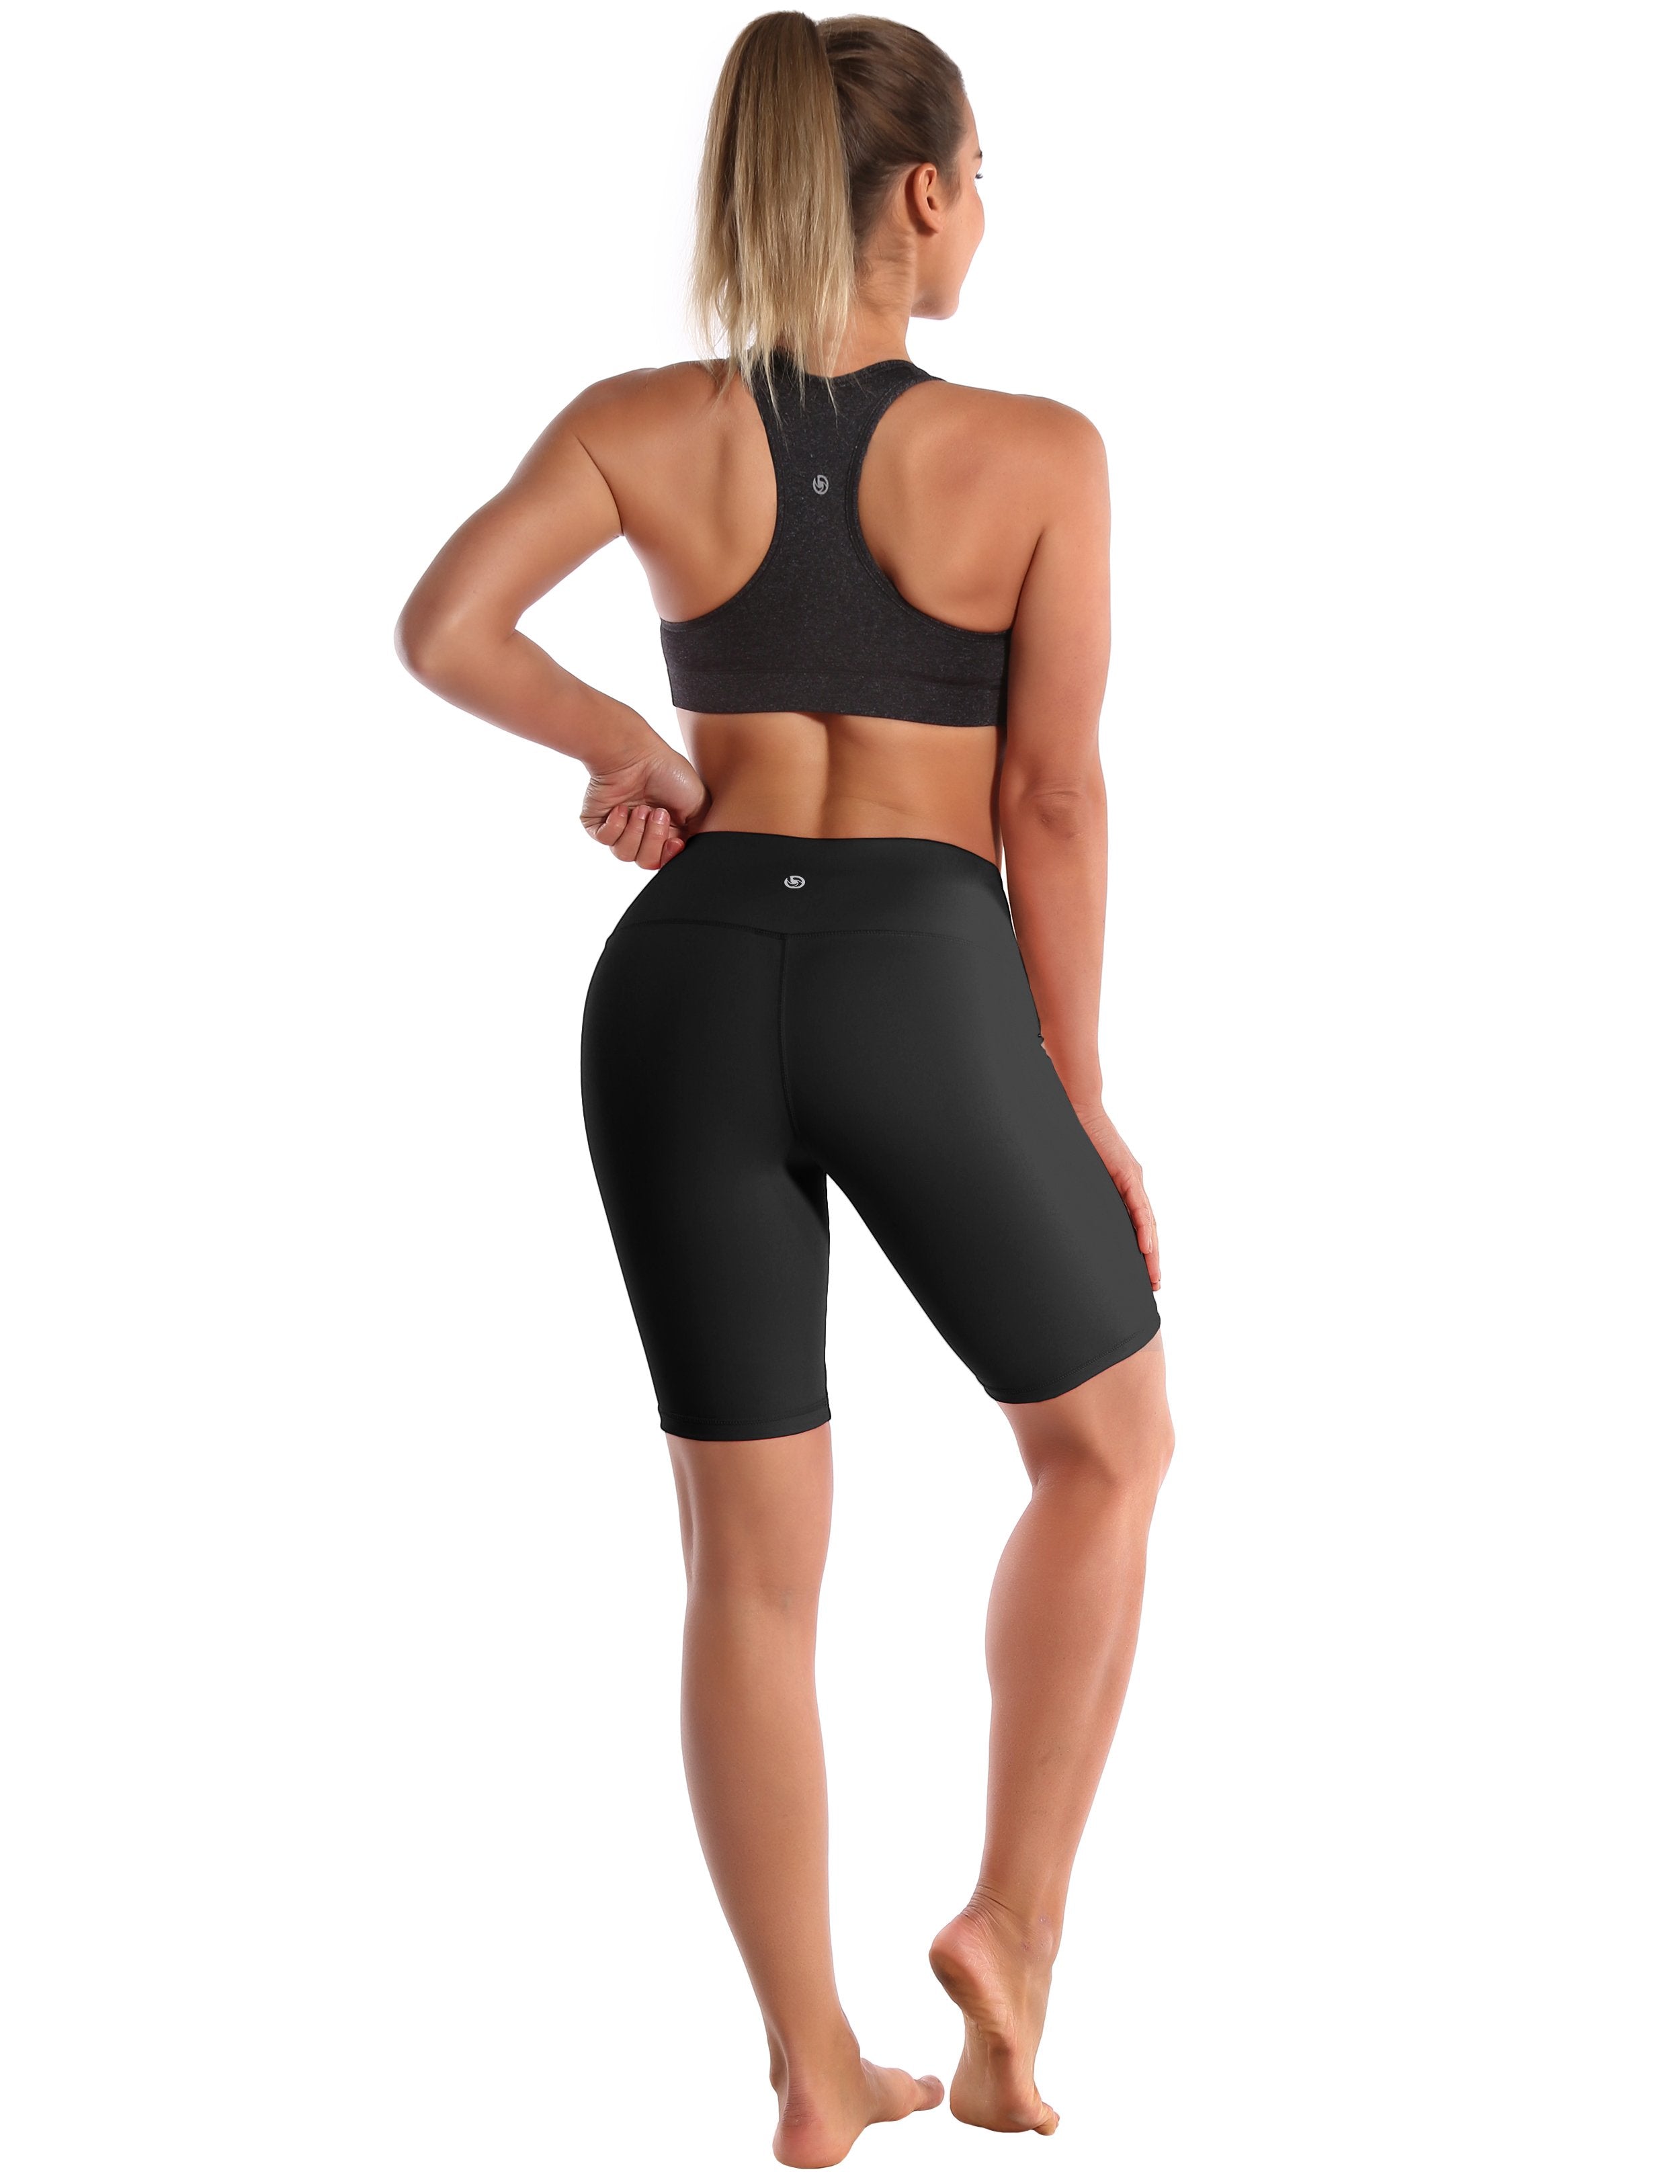 8" High Waist yogastudio Shorts black Sleek, soft, smooth and totally comfortable: our newest style is here. Softest-ever fabric High elasticity High density 4-way stretch Fabric doesn't attract lint easily No see-through Moisture-wicking Machine wash 75% Nylon, 25% Spandex